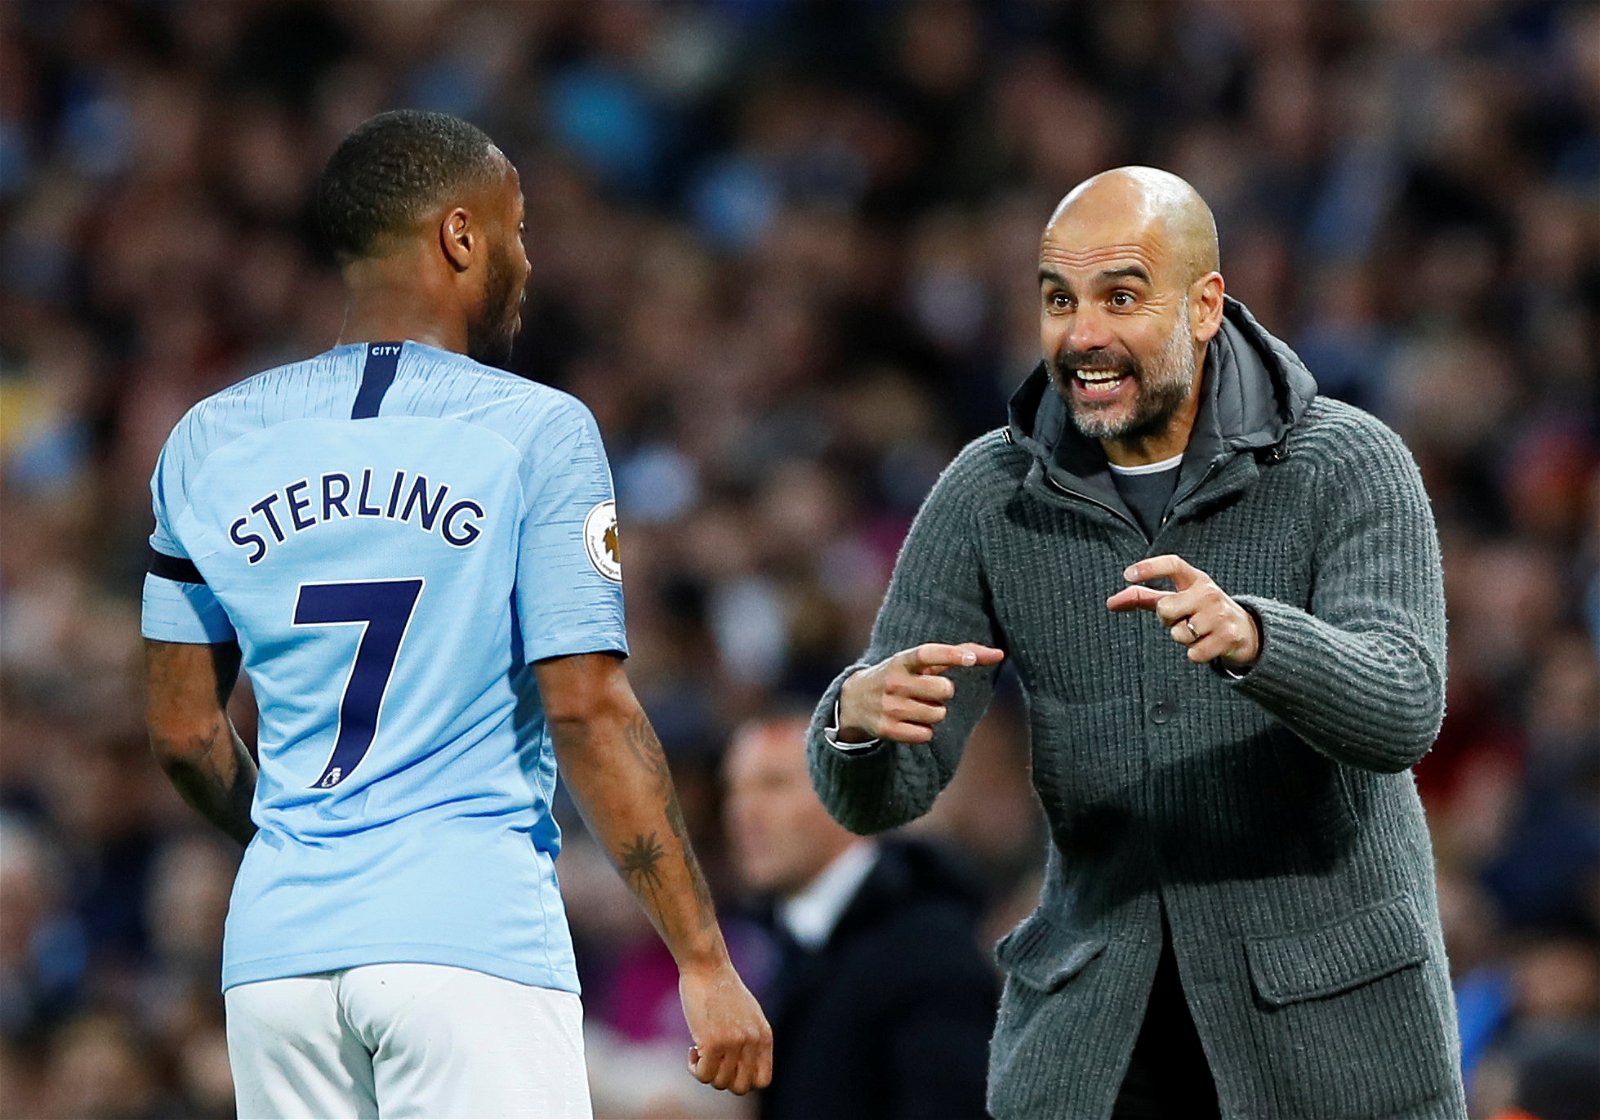 Raheem Sterling will sign new Manchester City contract on one condition